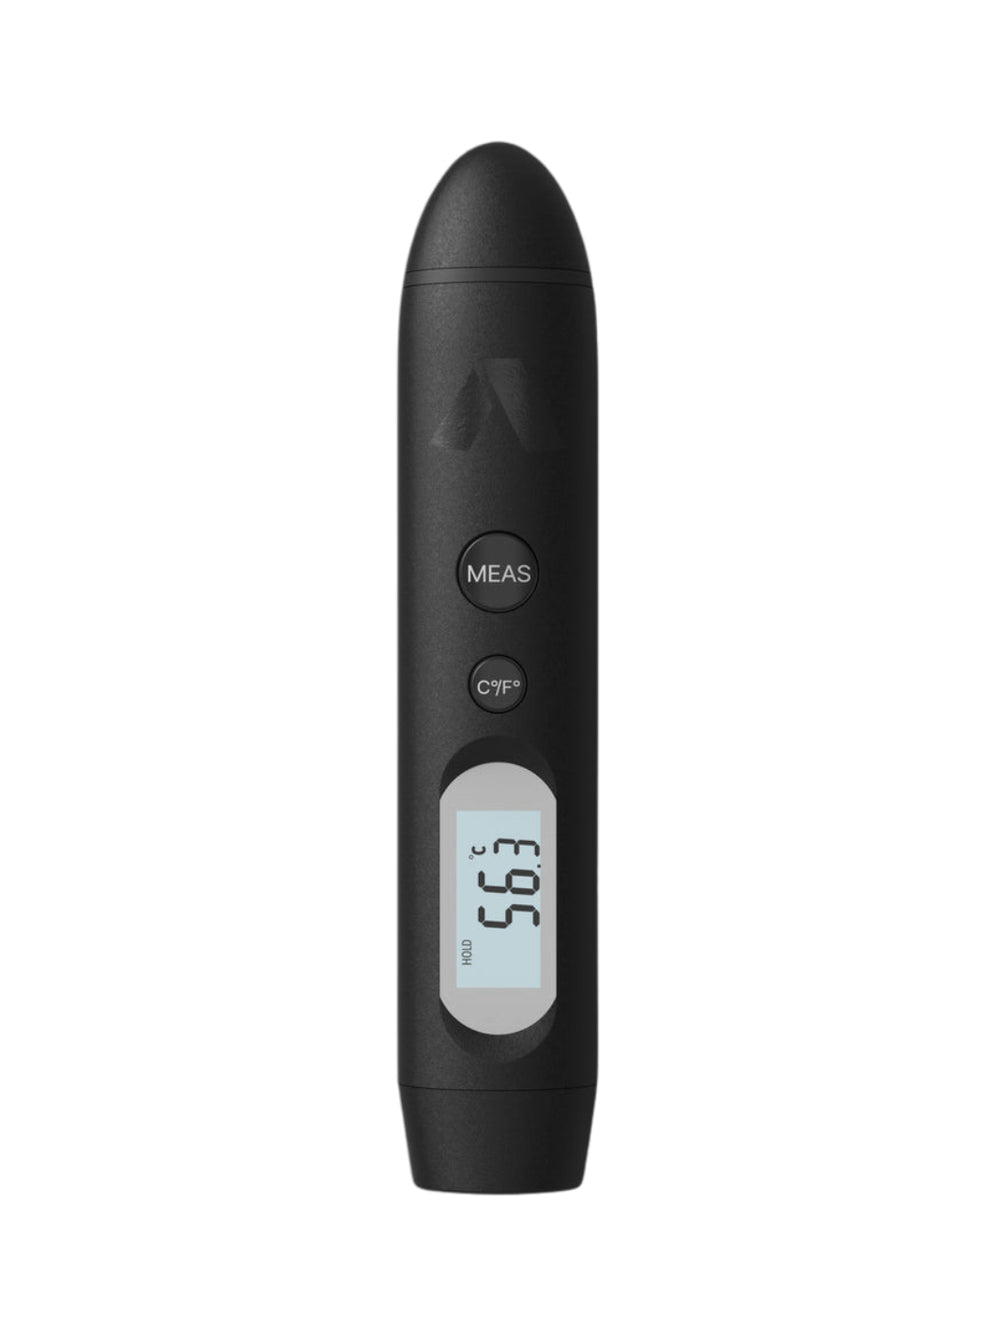 Photo of SUBMINIMAL Contactless Thermometer ( ) [ Subminimal ] [ Barista Tools ]